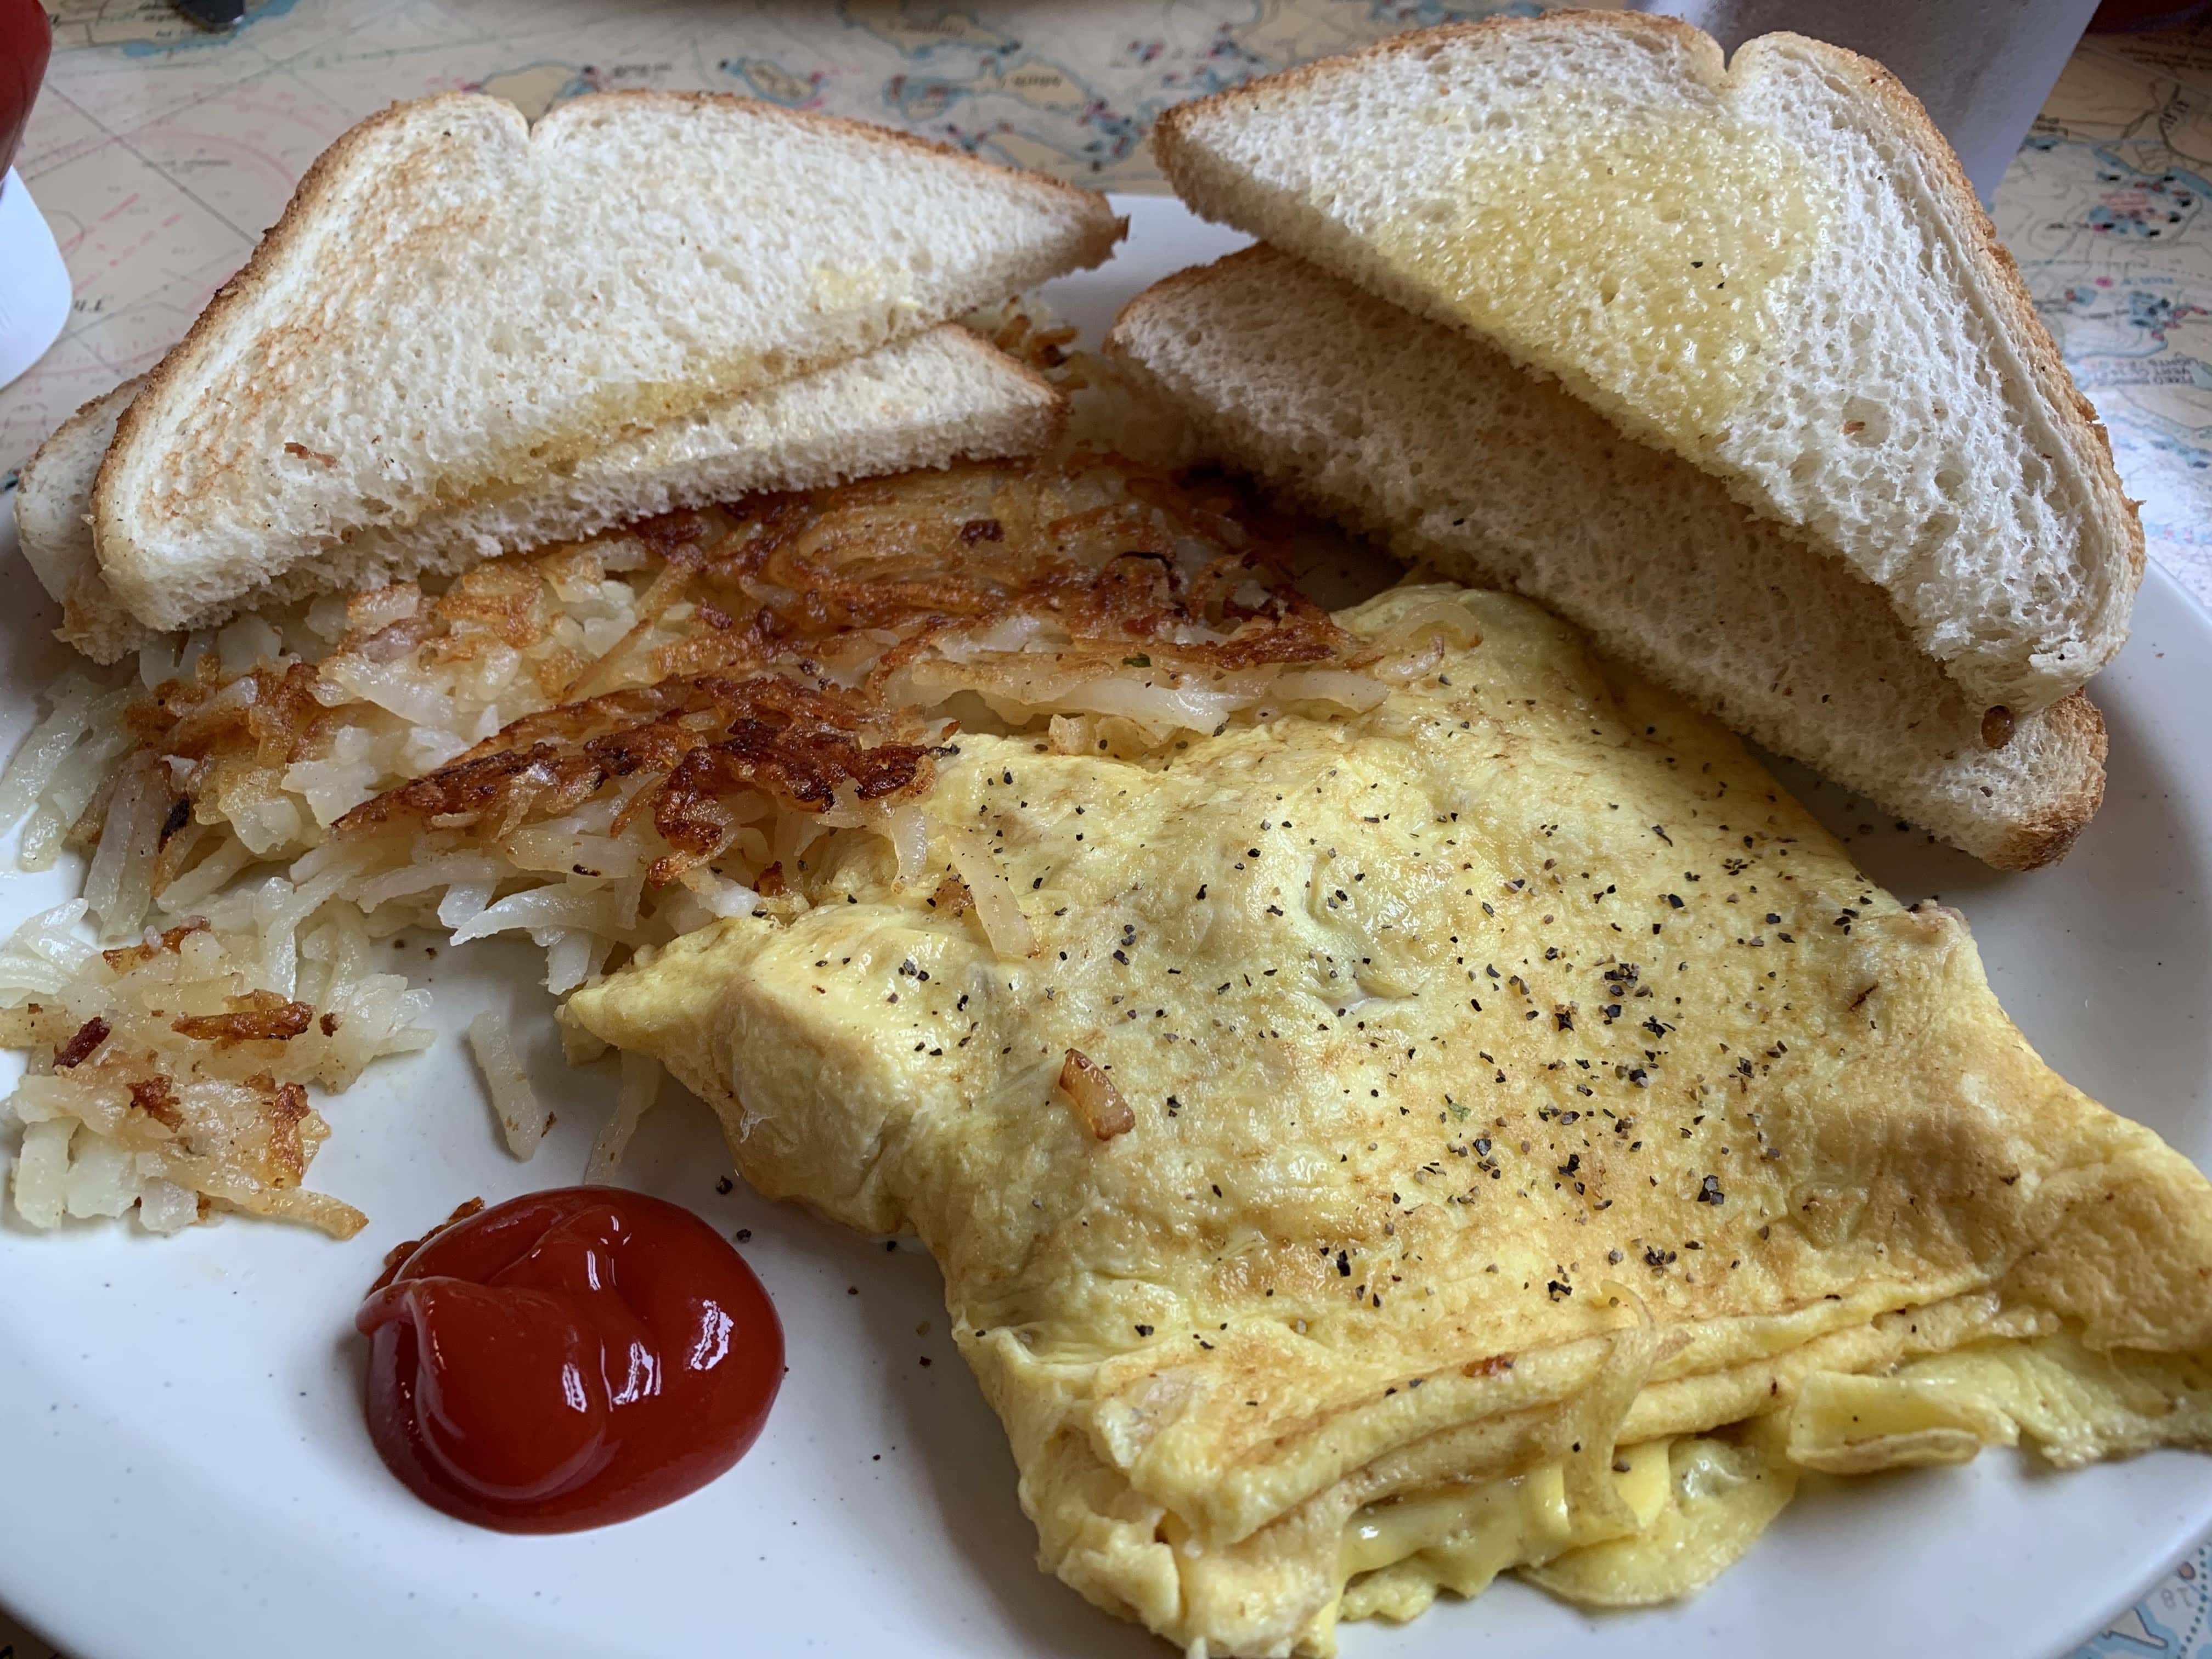 Bayside Diner and Eatery - Alton Bay, NH, US, best breakfast places near me